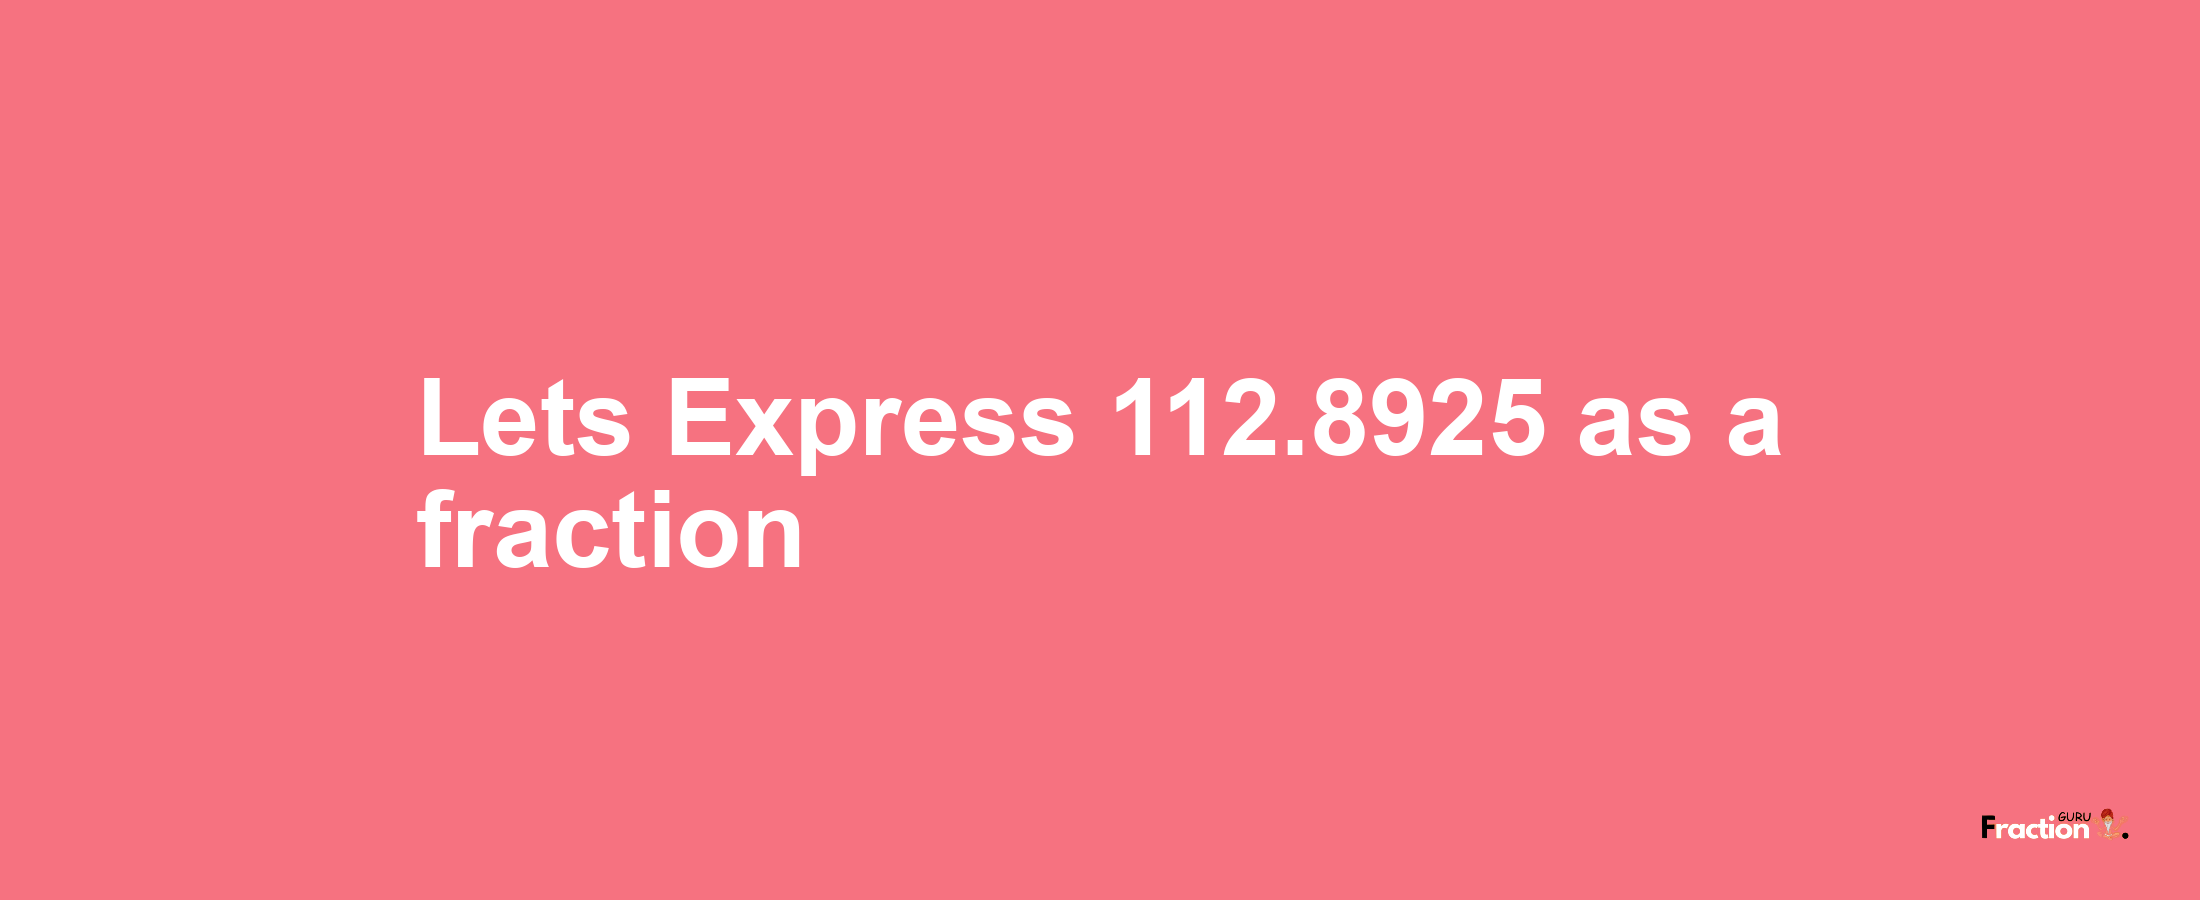 Lets Express 112.8925 as afraction